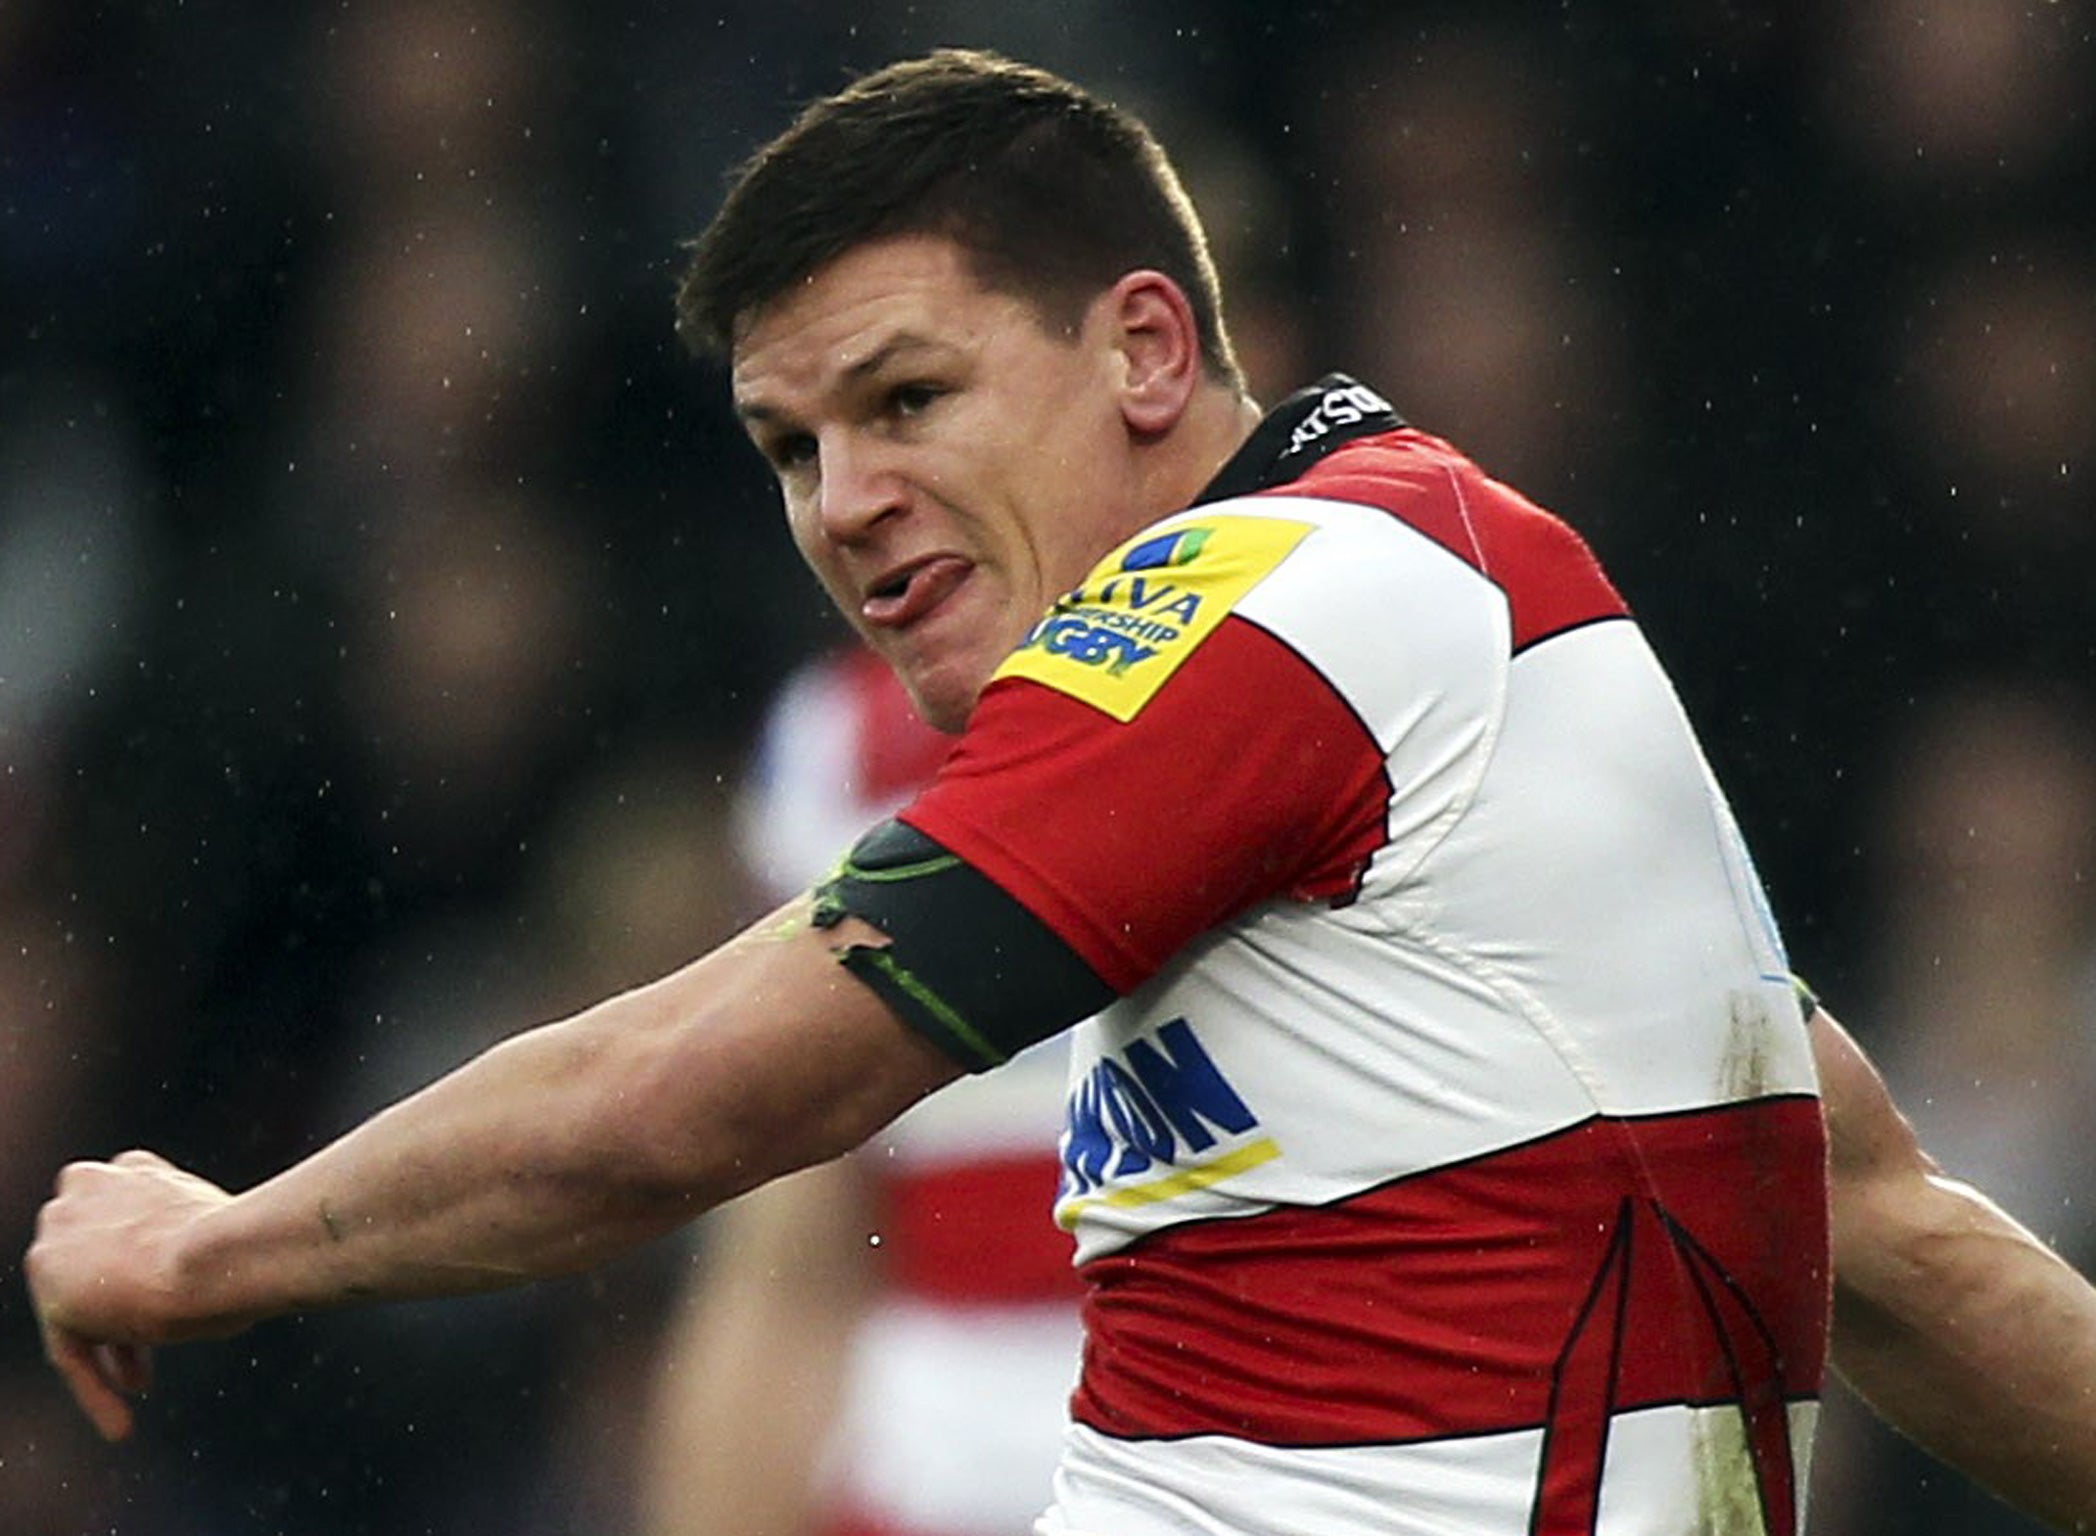 Gloucester’s Freddie Burns (pictured) had his head coach, Nigel Davies, suggesting an England call-up was due after he put Danny Cipriani in the shade in the 29-3 home defeat of Sale.